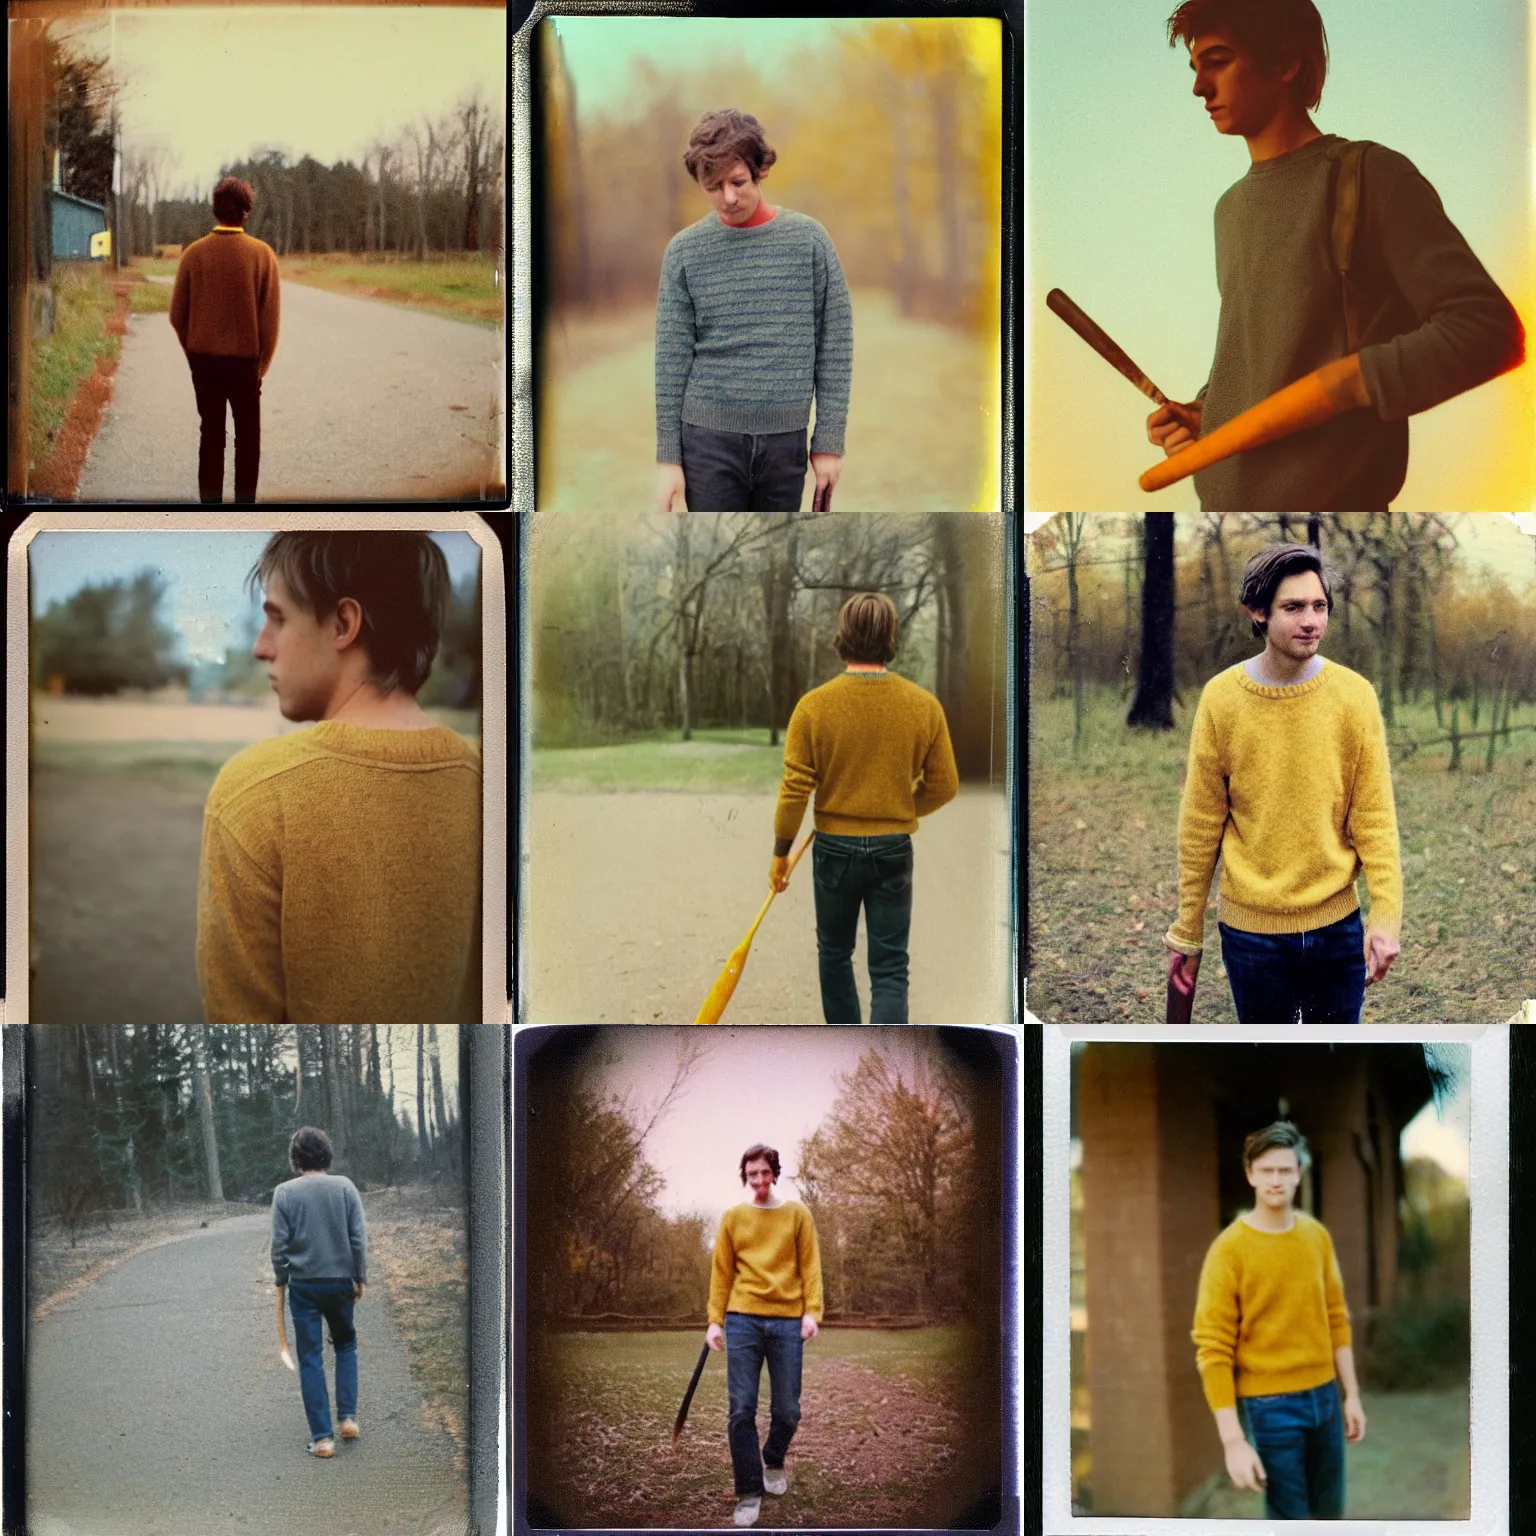 Prompt: instax polaroid film photo of an attractive young man with messy medium length light brown hair and a yellow sweater walking away from the camera with a nail bat, zoomed out, warm, nostalgia, faded glow, expired film analog photography, grainy texturized dusty, saturated colorized